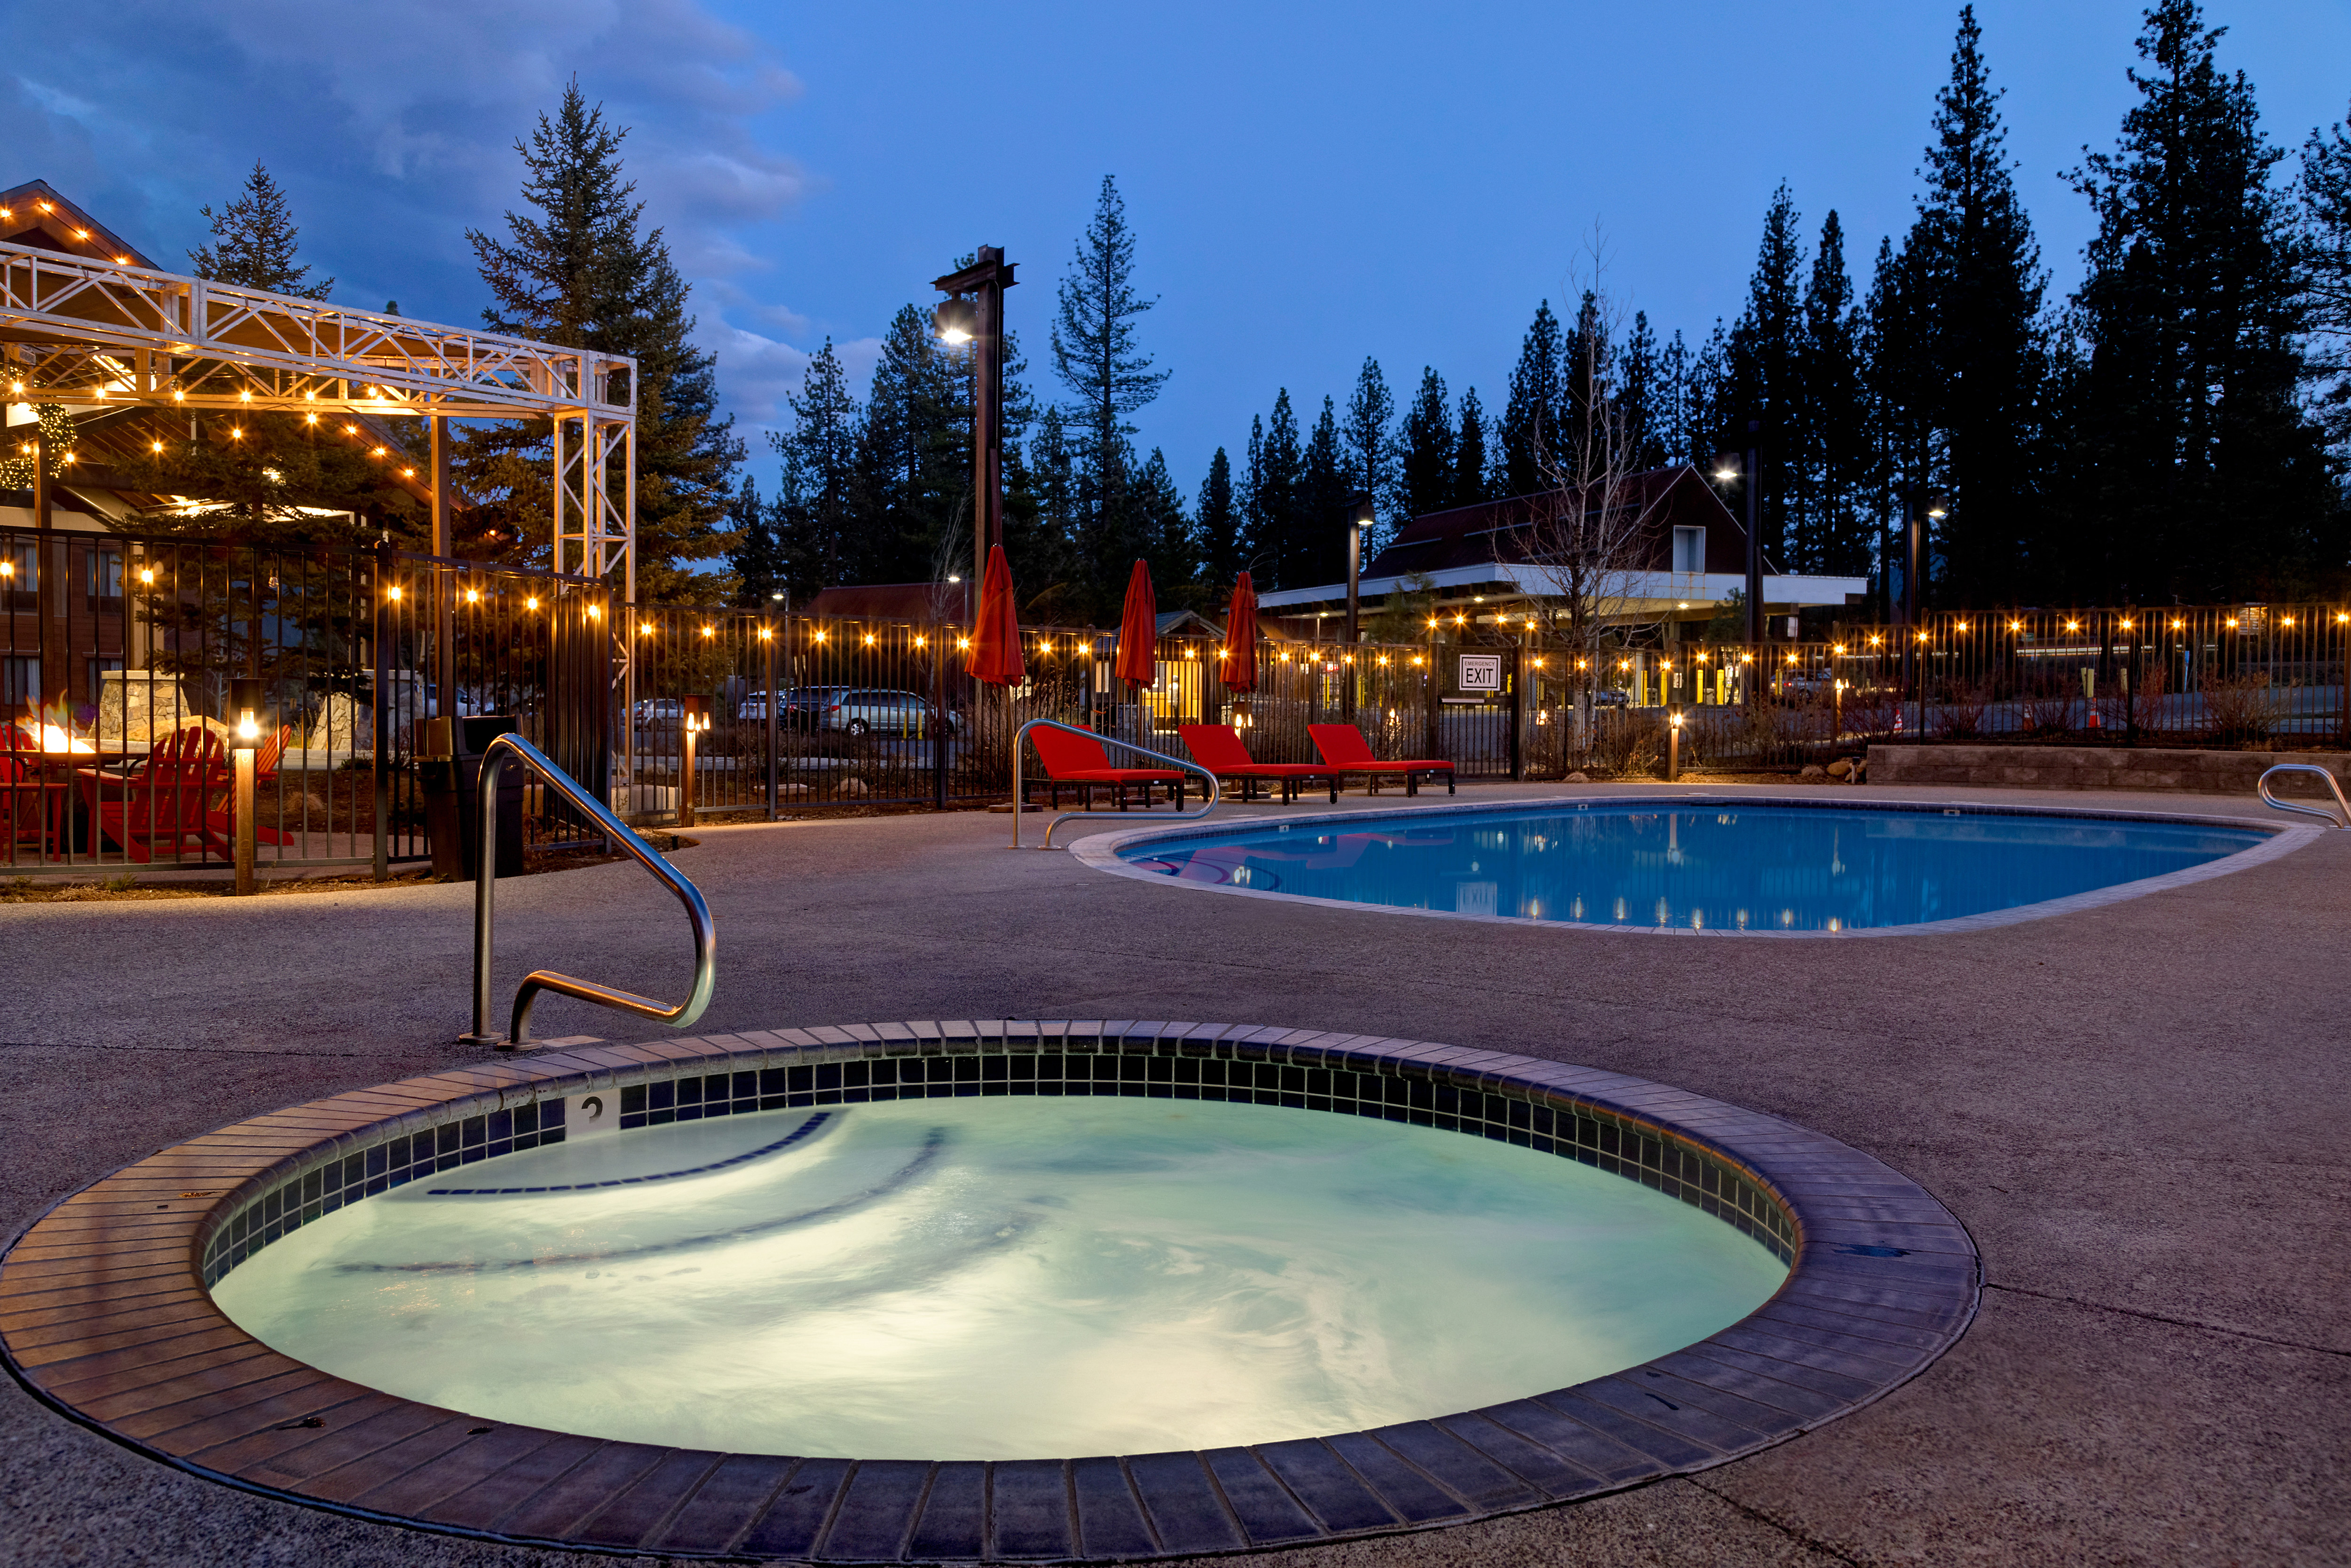 Outdoor Pool and Whirlpool at Night